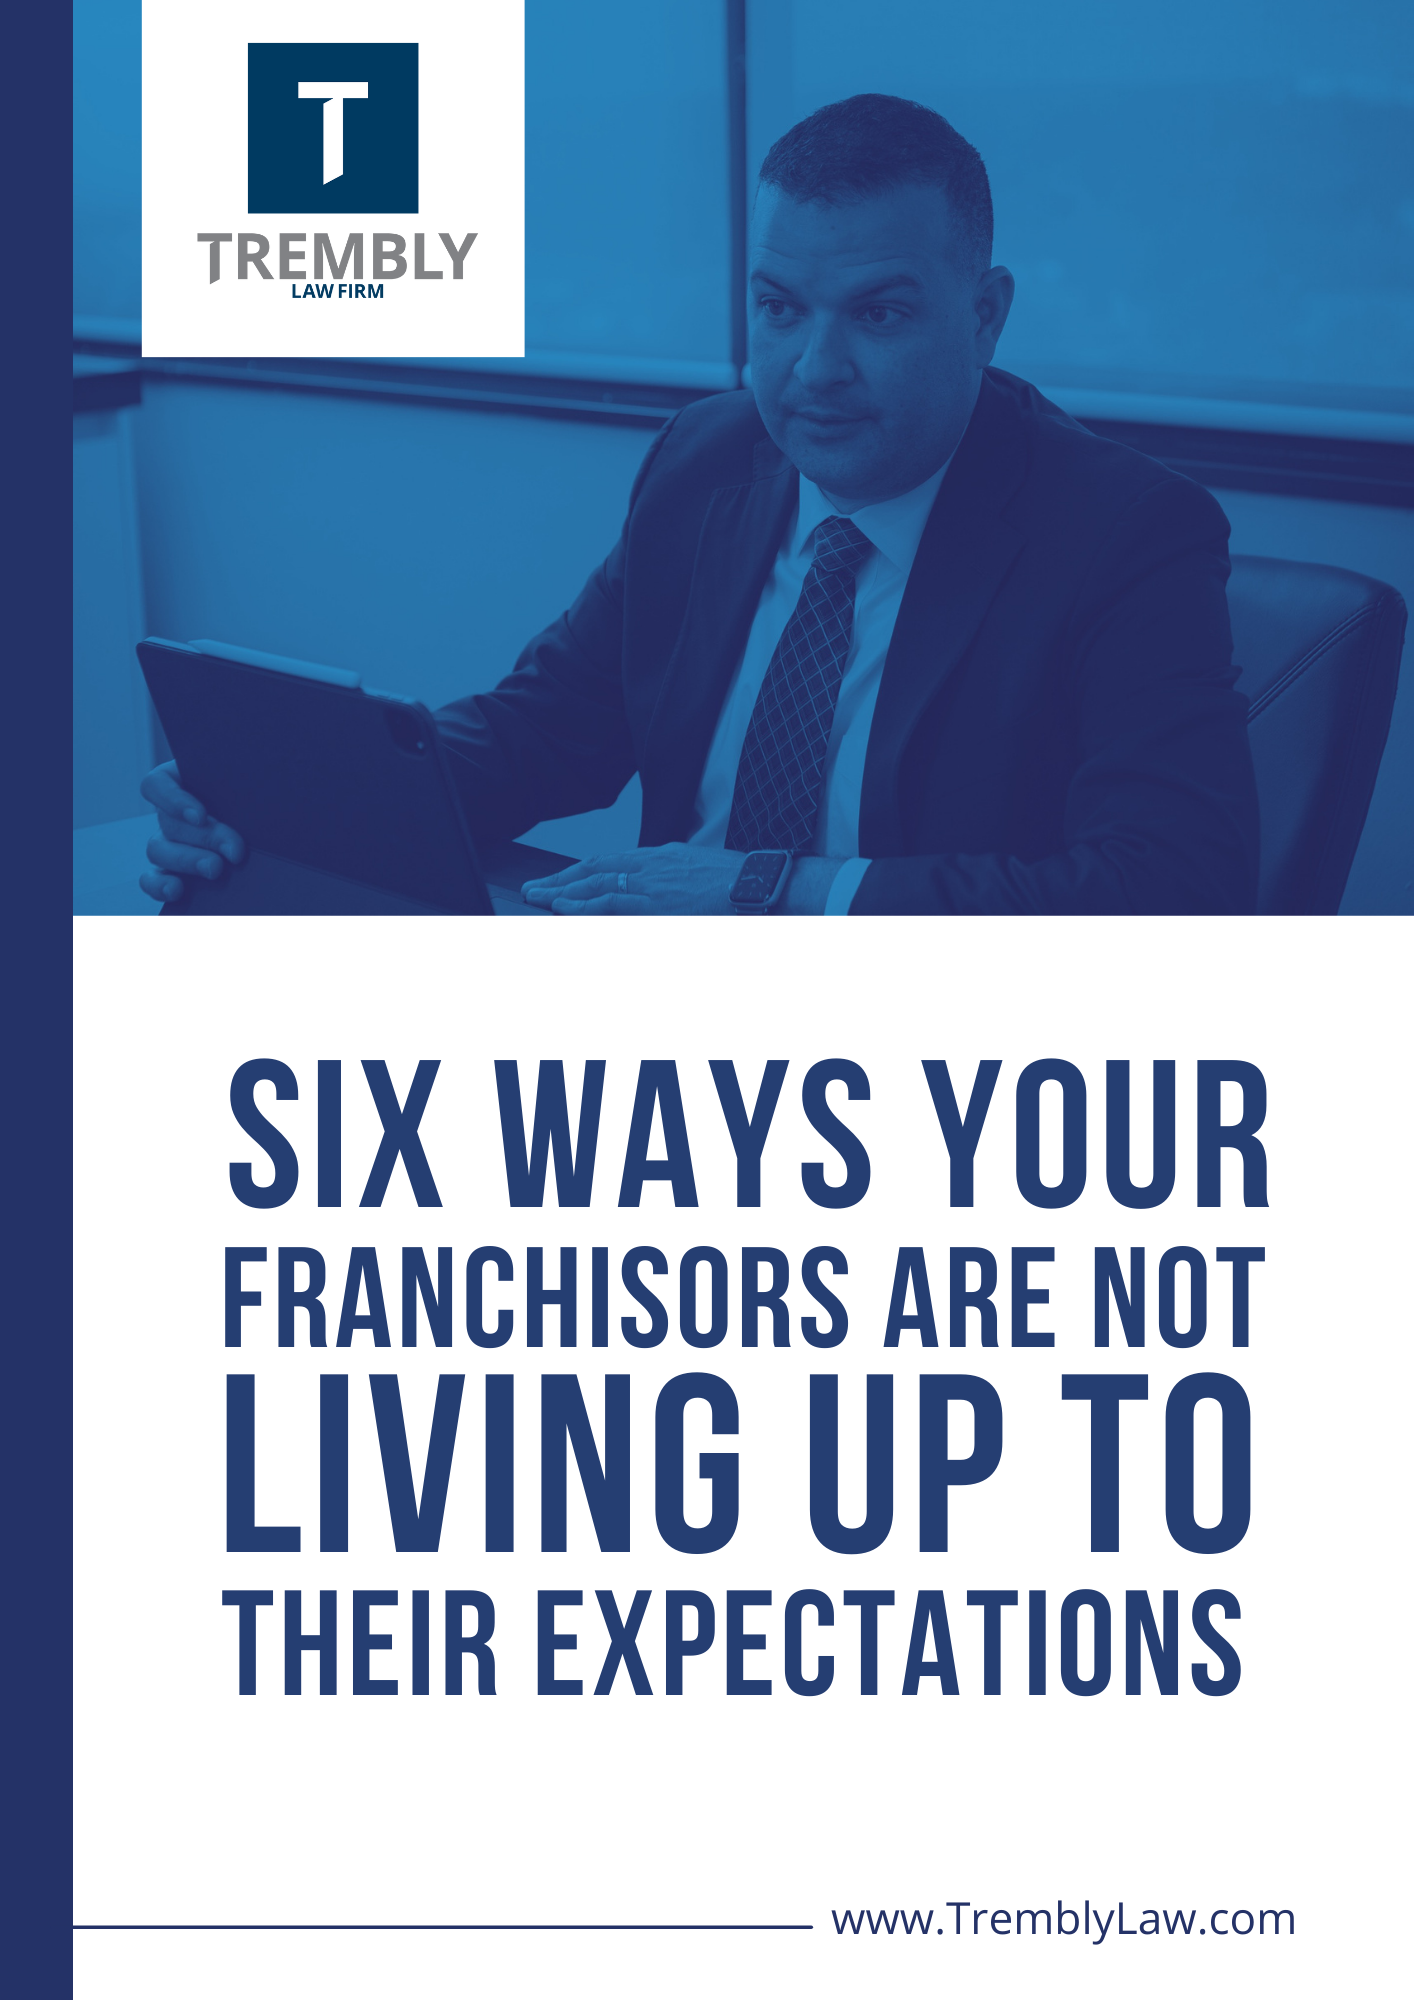 Six ways your franchisors are not living up to their expectations